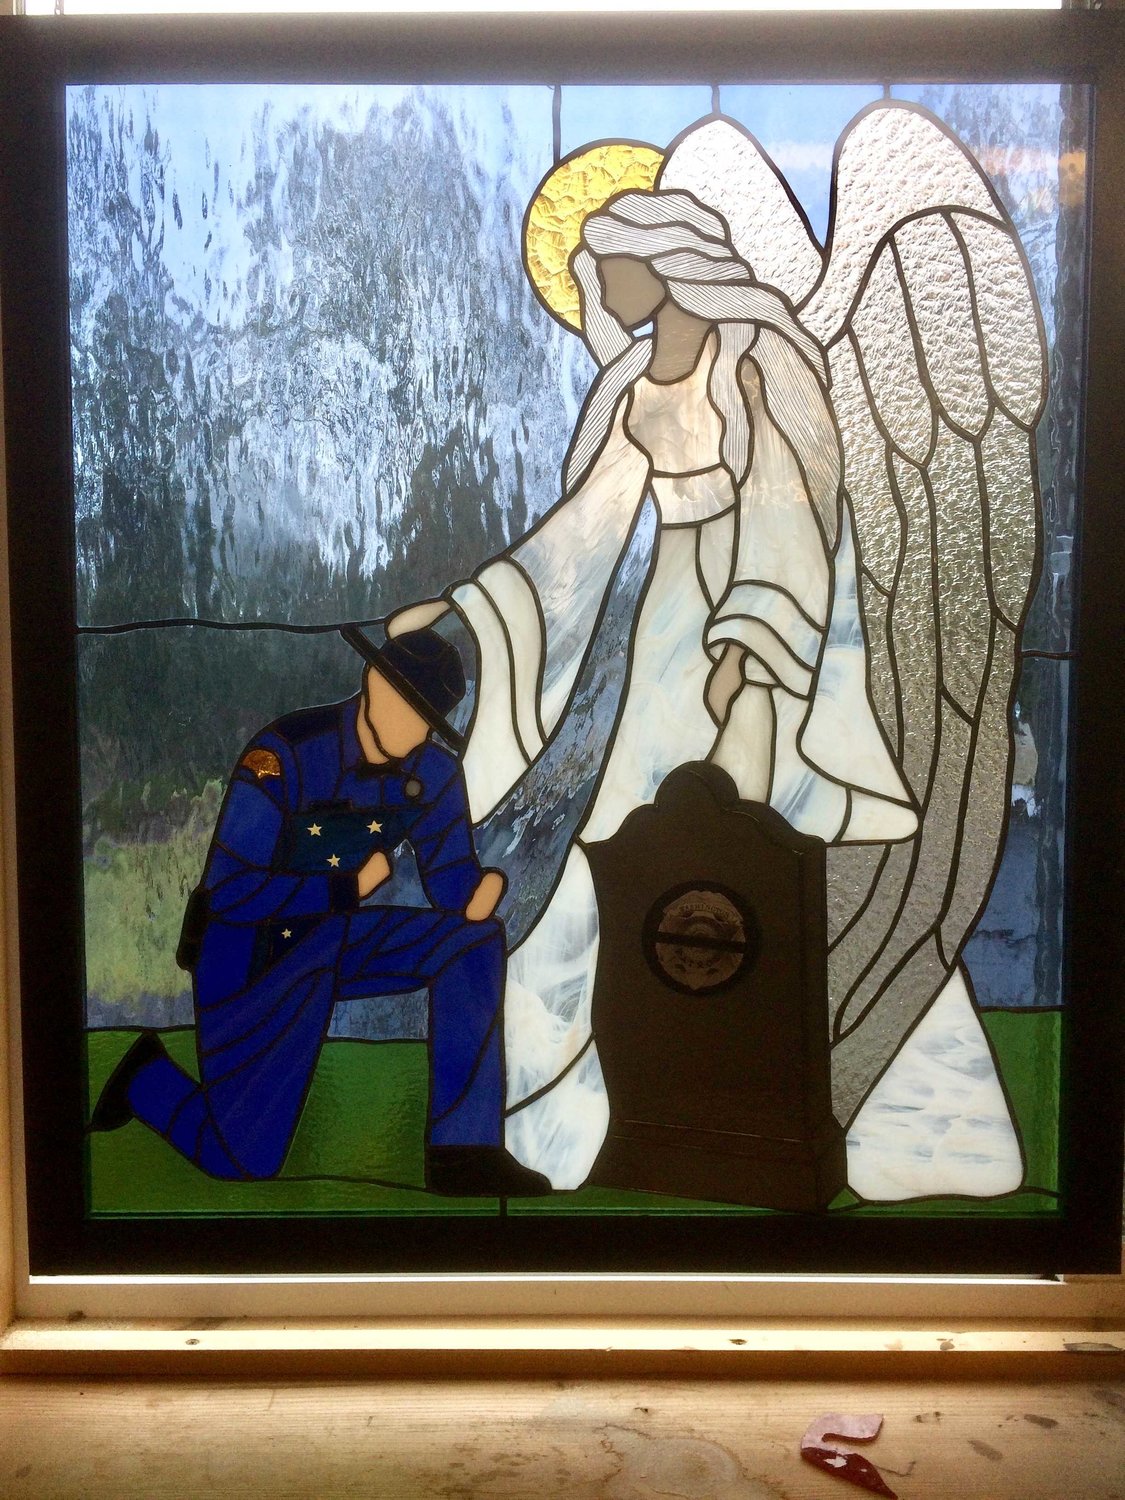 The window depicts a state trooper kneeling at a grave while being comforted by an angel. It aims to recognize those who have died during their service with the state patrol.